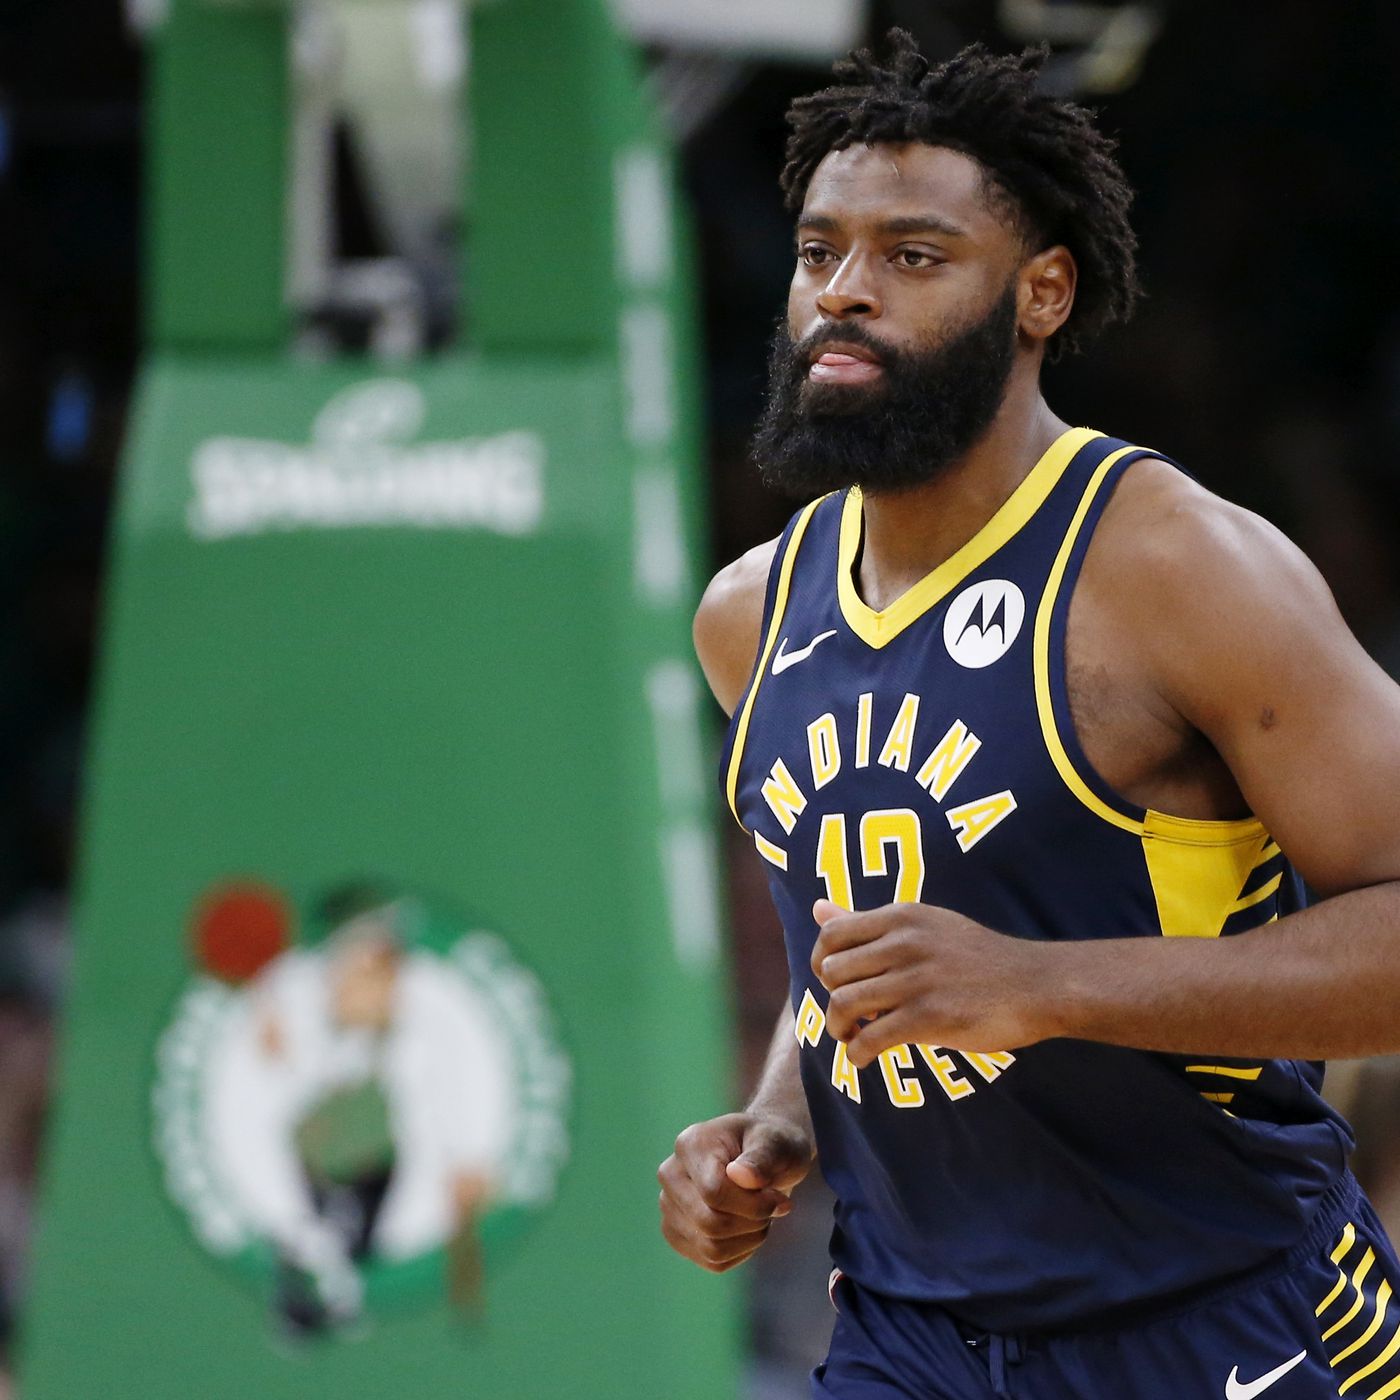 Tyreke Evans of Indiana Pacers Dismissed from NBA for Drug Violations -  Blazer's Edge